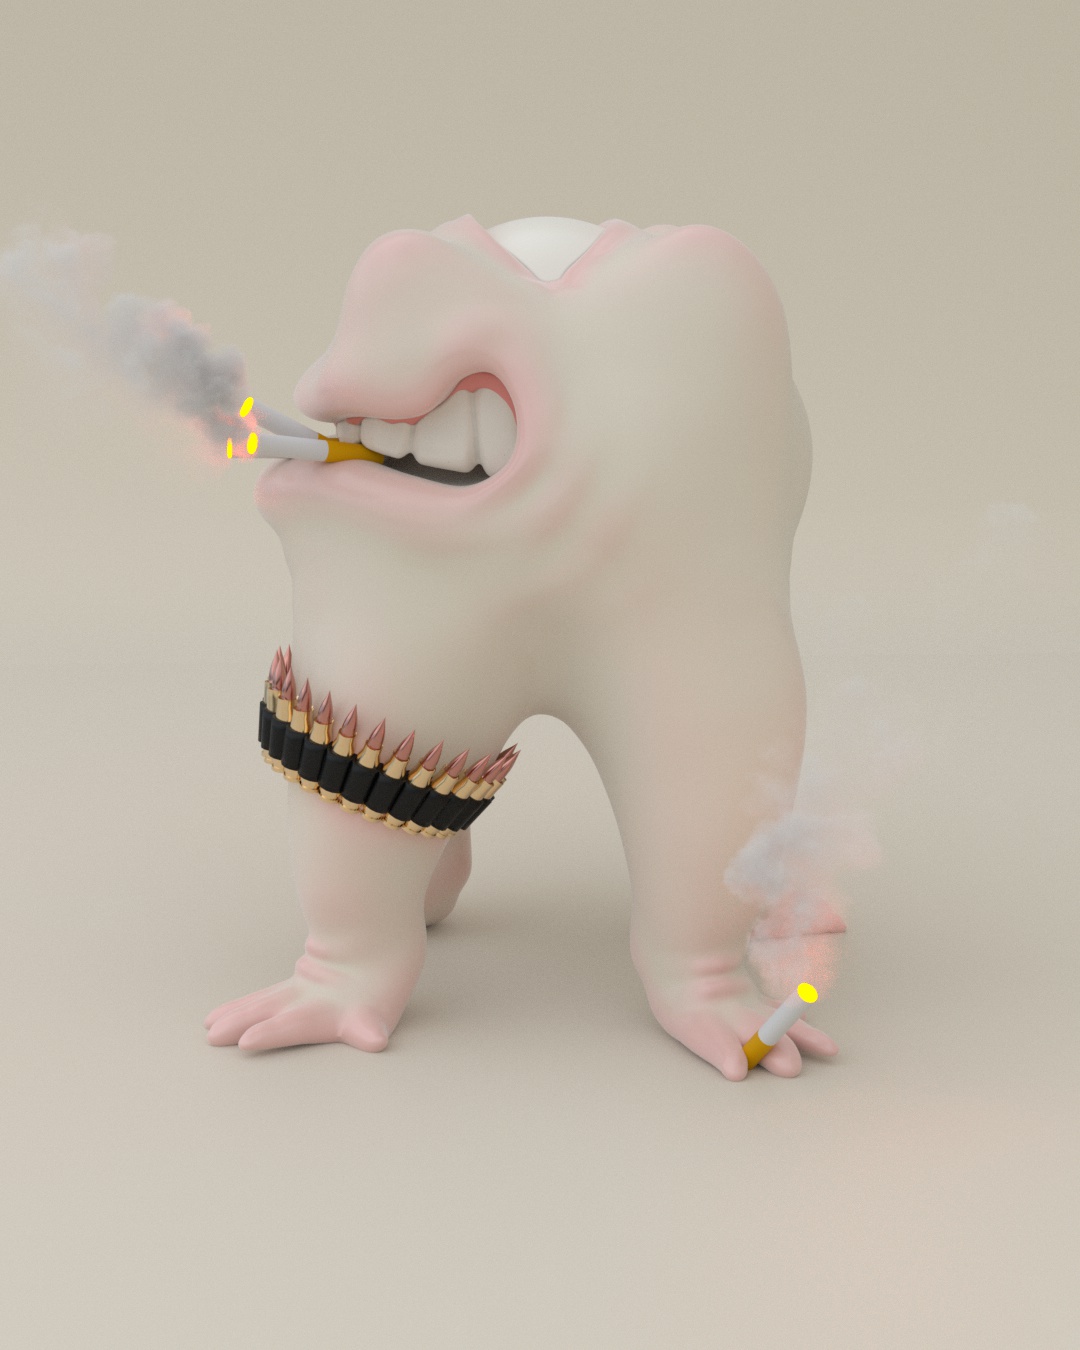 image of a tooth with an eye and smoking